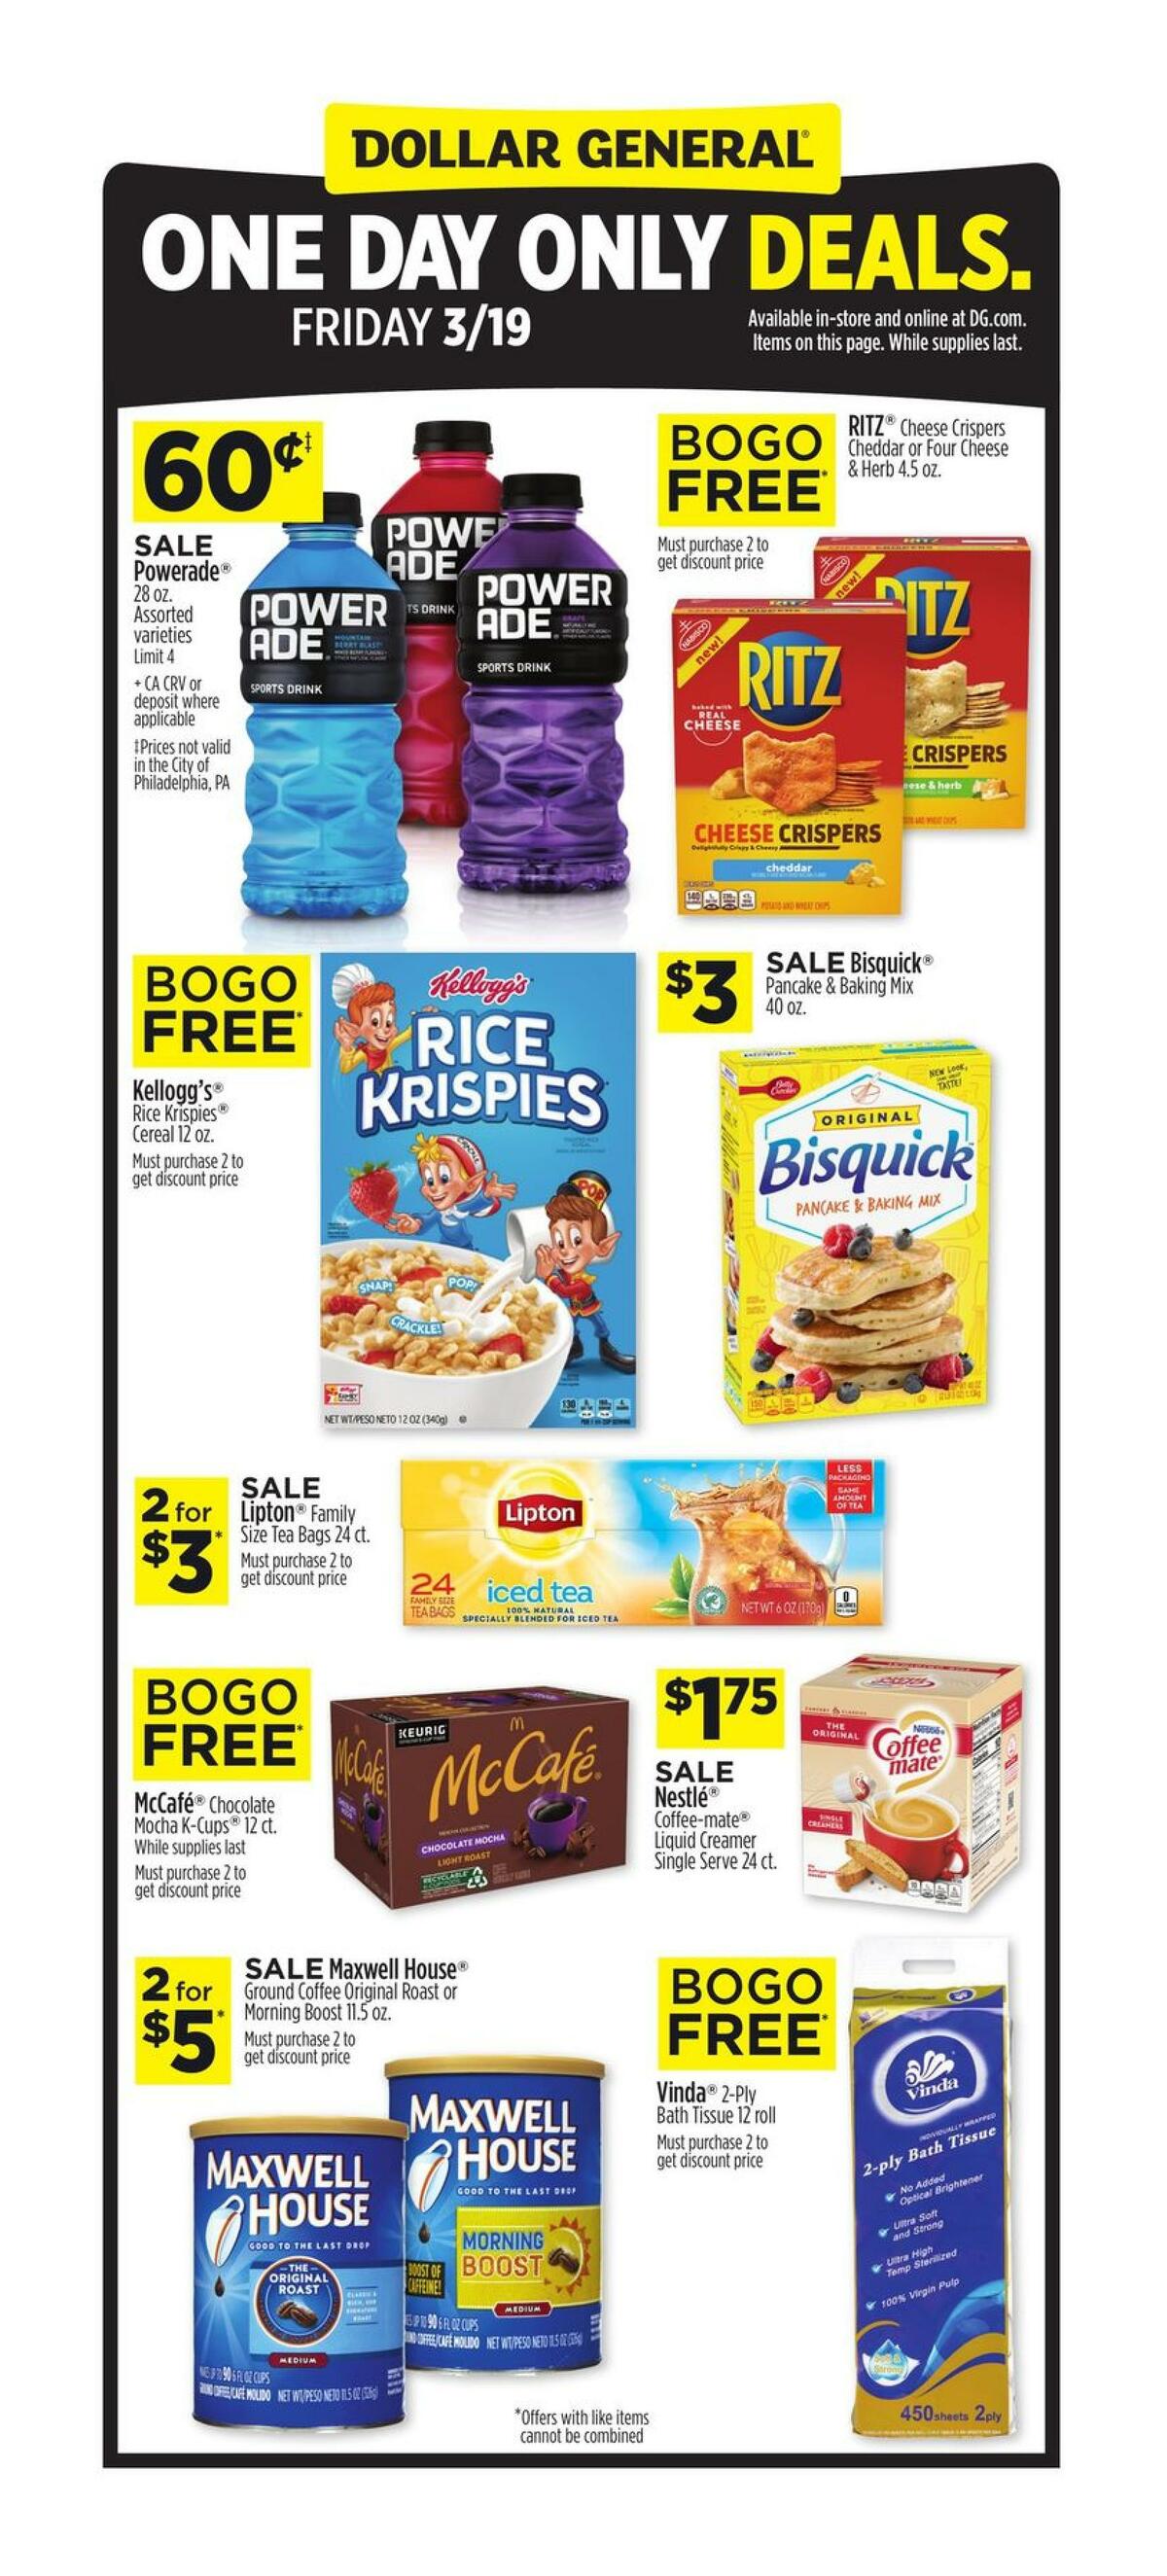 Dollar General One Day Only Deals Weekly Ad from March 19